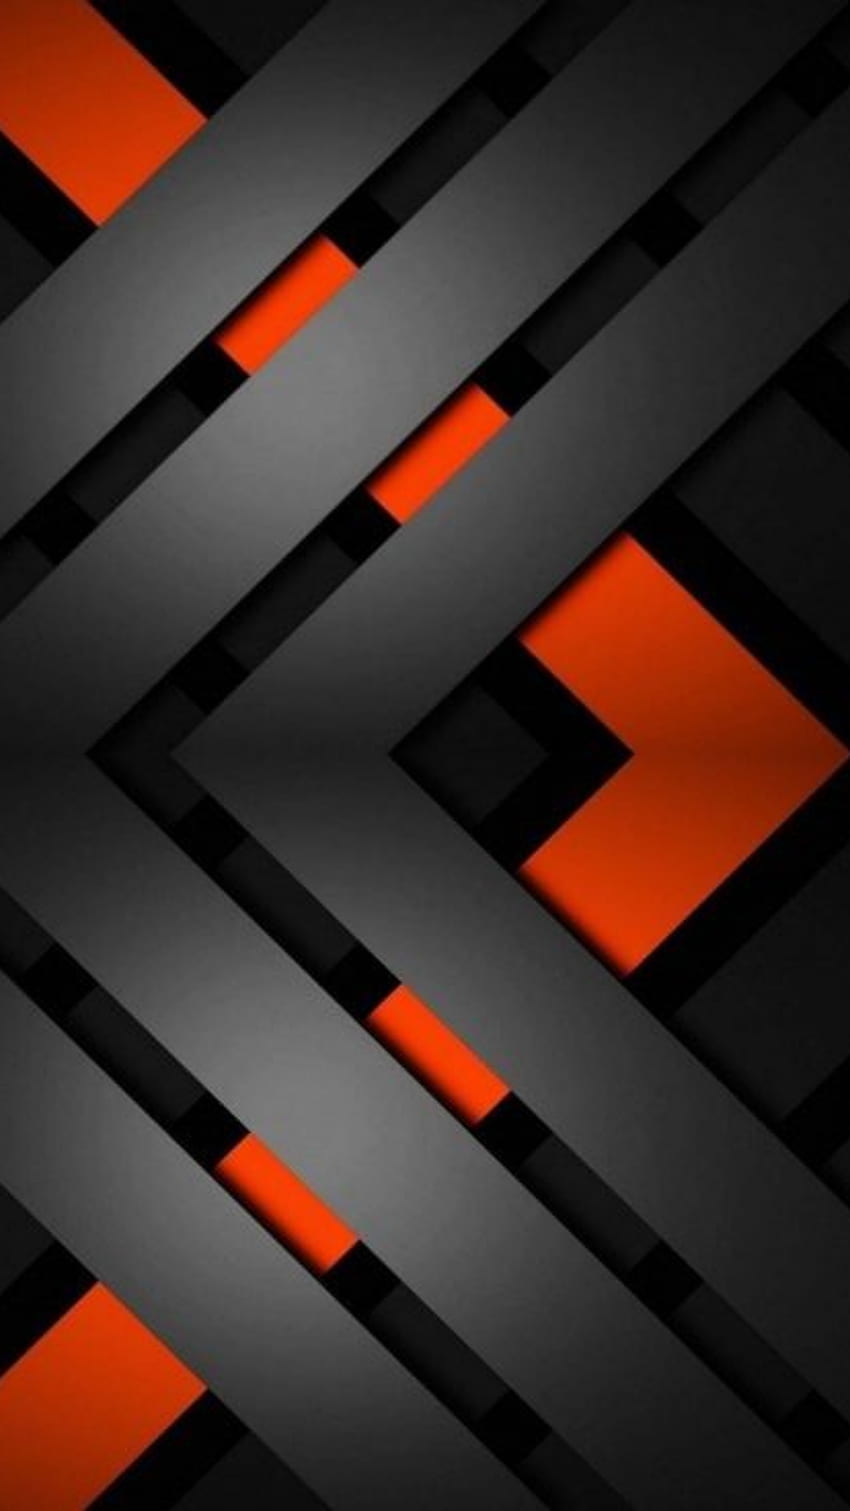 material design black, digital, orange, gray, layers, pattern, abstract, galaxy, lines, tint, colorful HD phone wallpaper